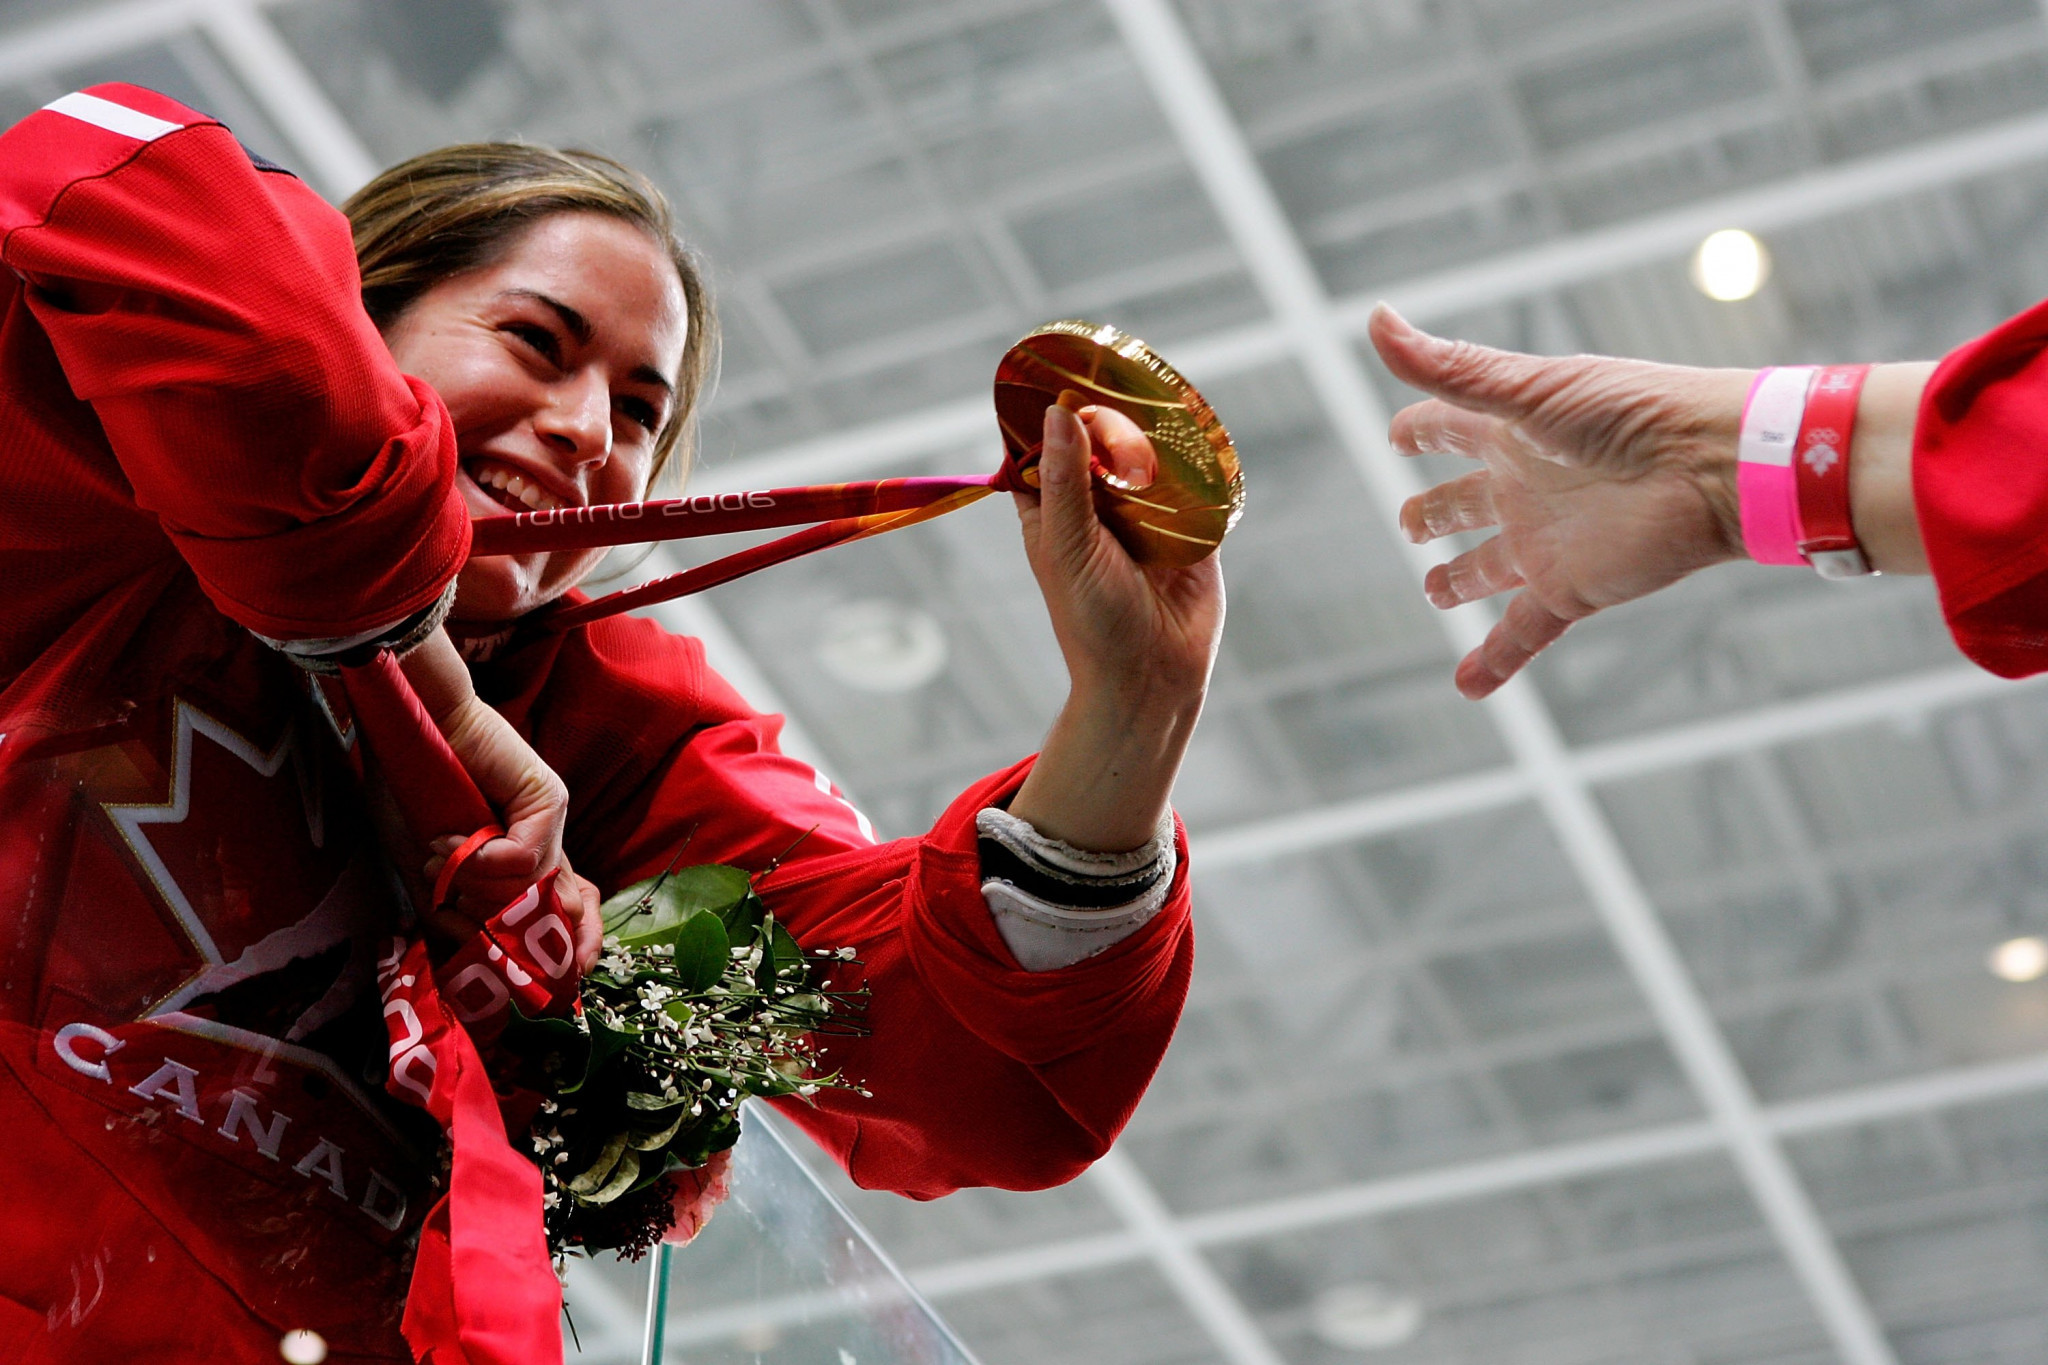 Katie Weatherston won Olympic gold with Canada at Turin 2006 but has slammed the country's ice hockey governing body for its approach to players' medical bills ©Getty Images